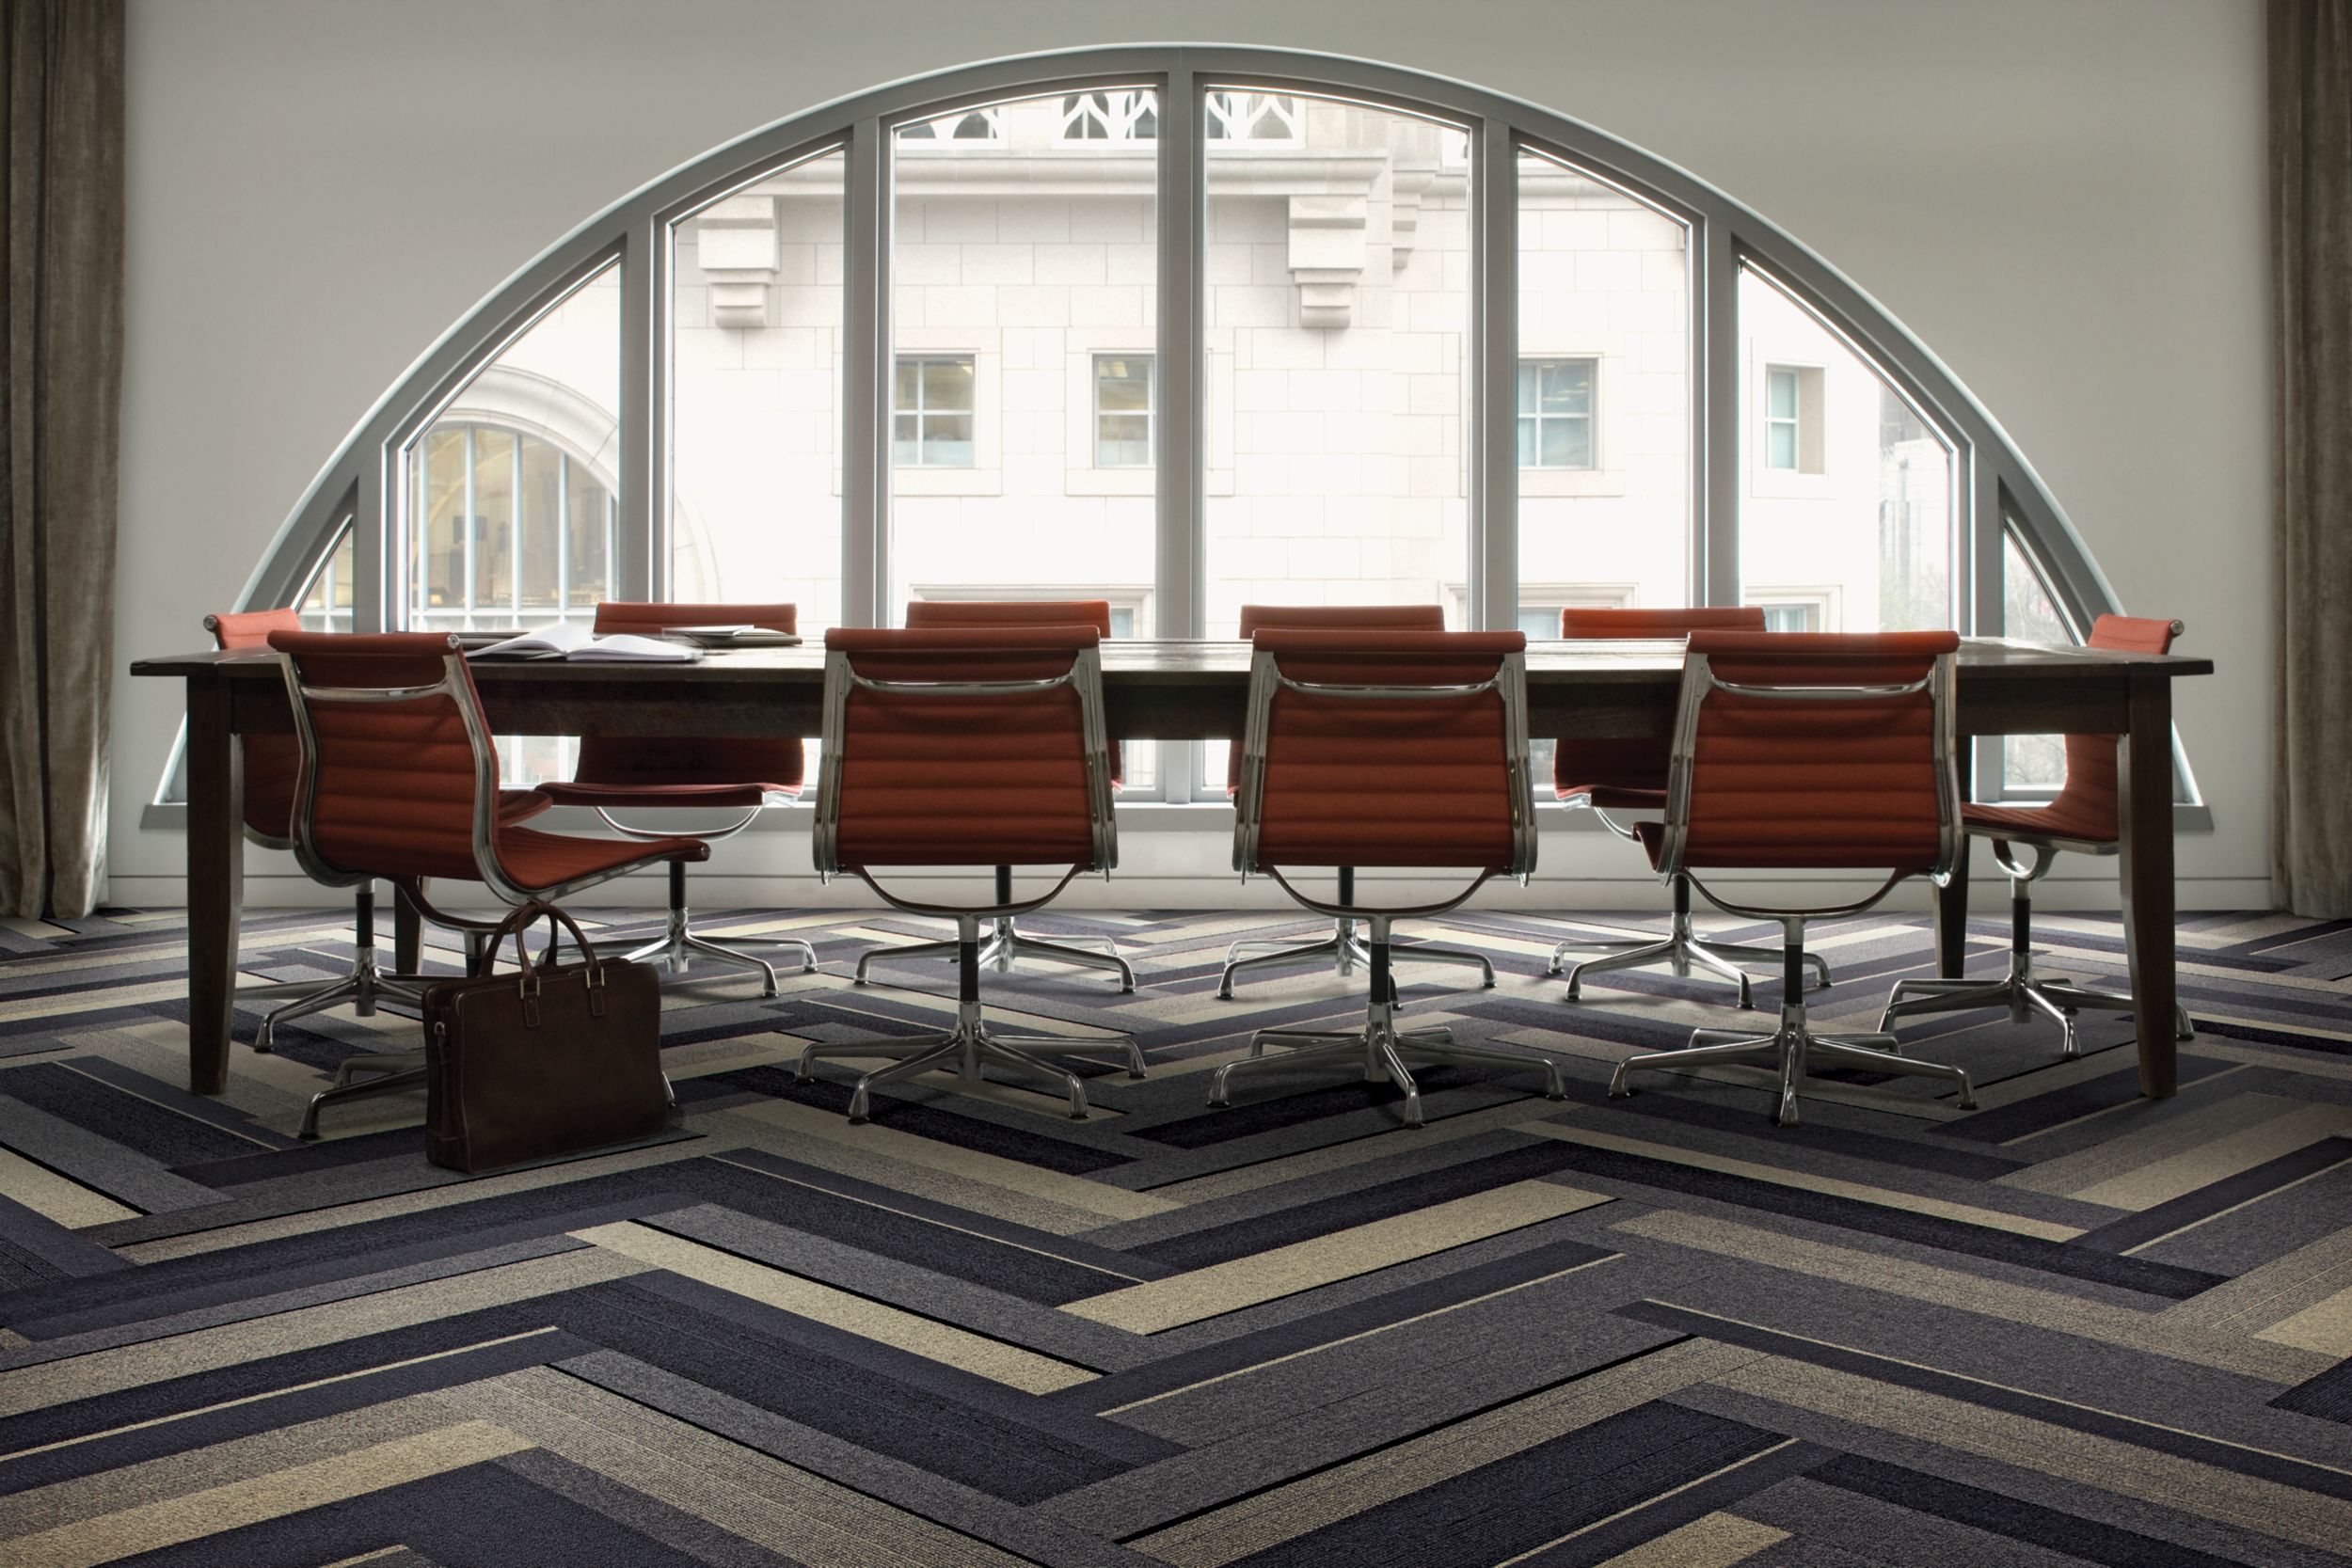 Interface PH210 plank carpet tile in naturally lighted meeting room with red chairs numéro d’image 8